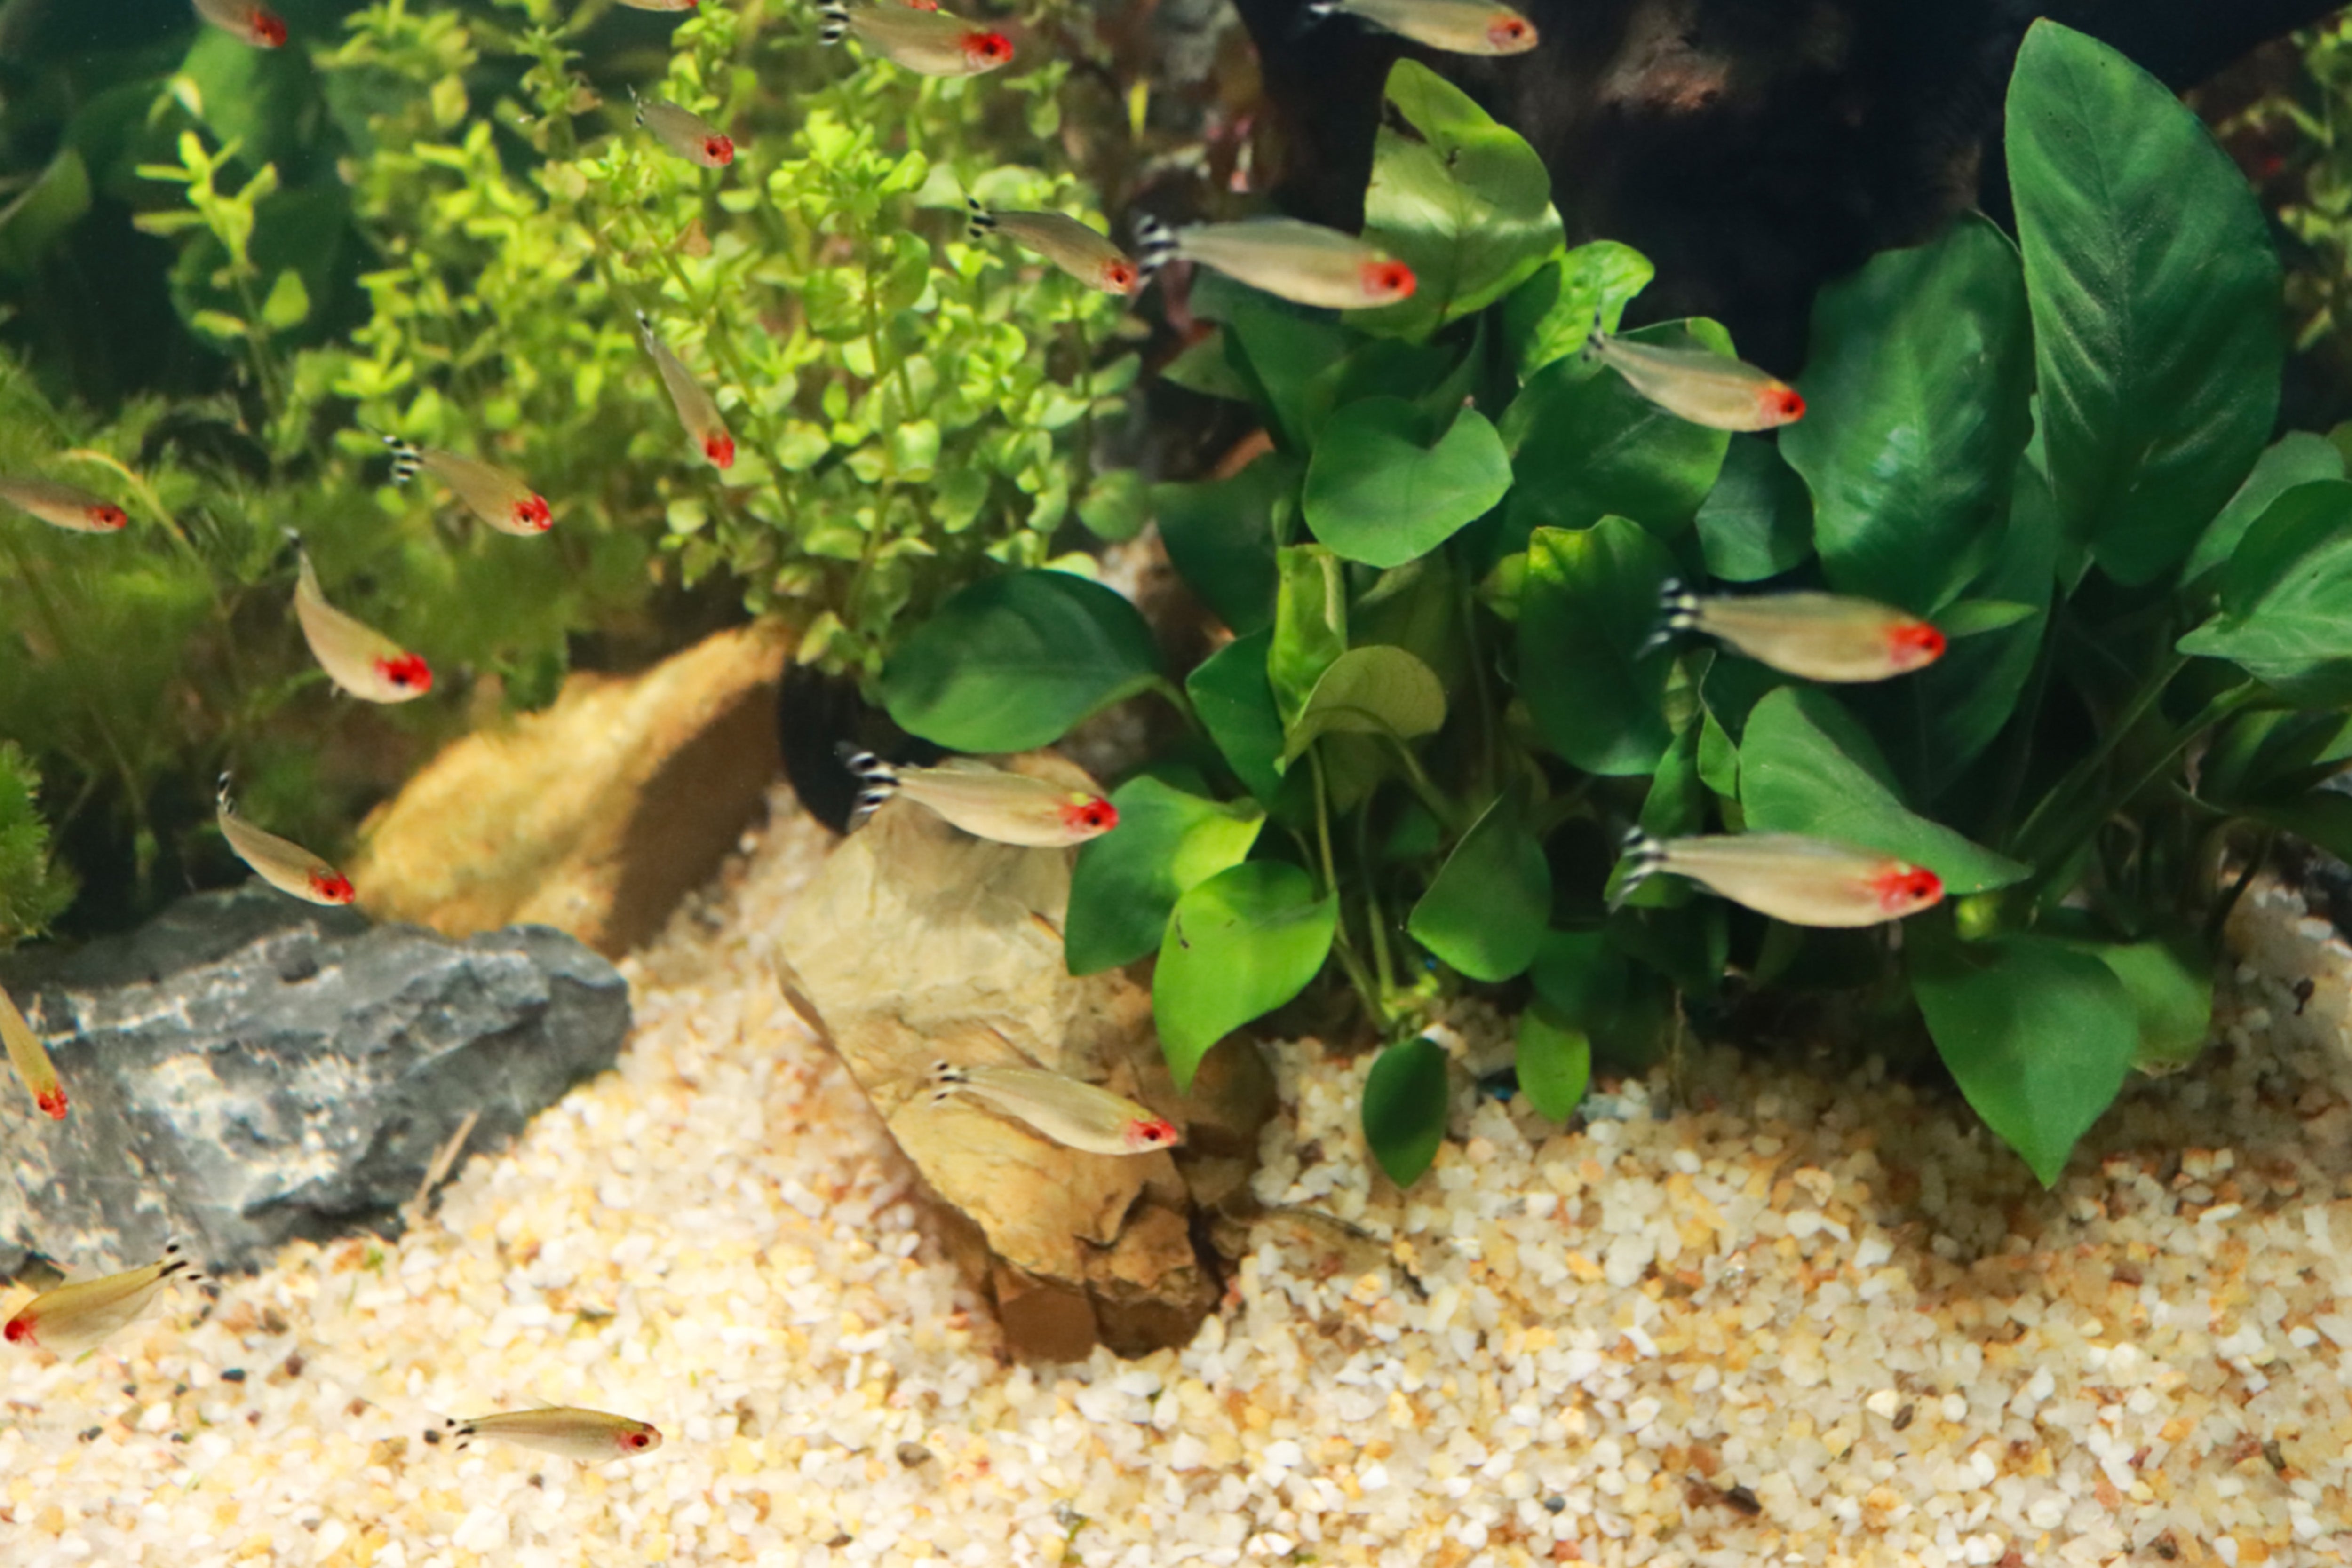 Why are fish tanks prone to getting dirty in summer?